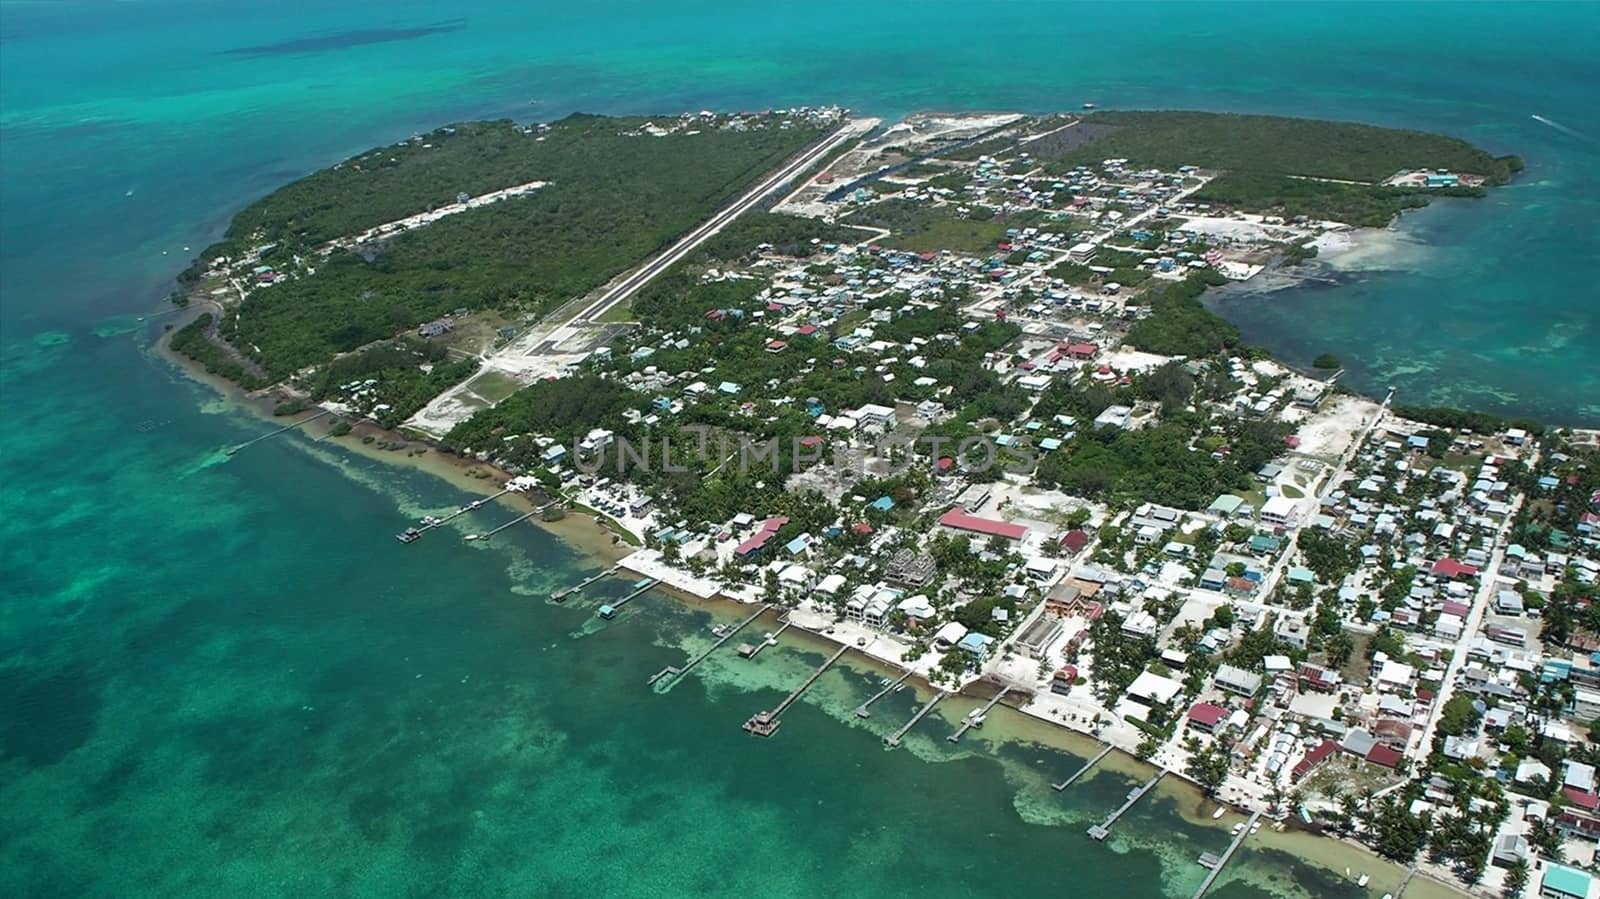 Ambergris caye aerial photo from plane window belize central america caribbean